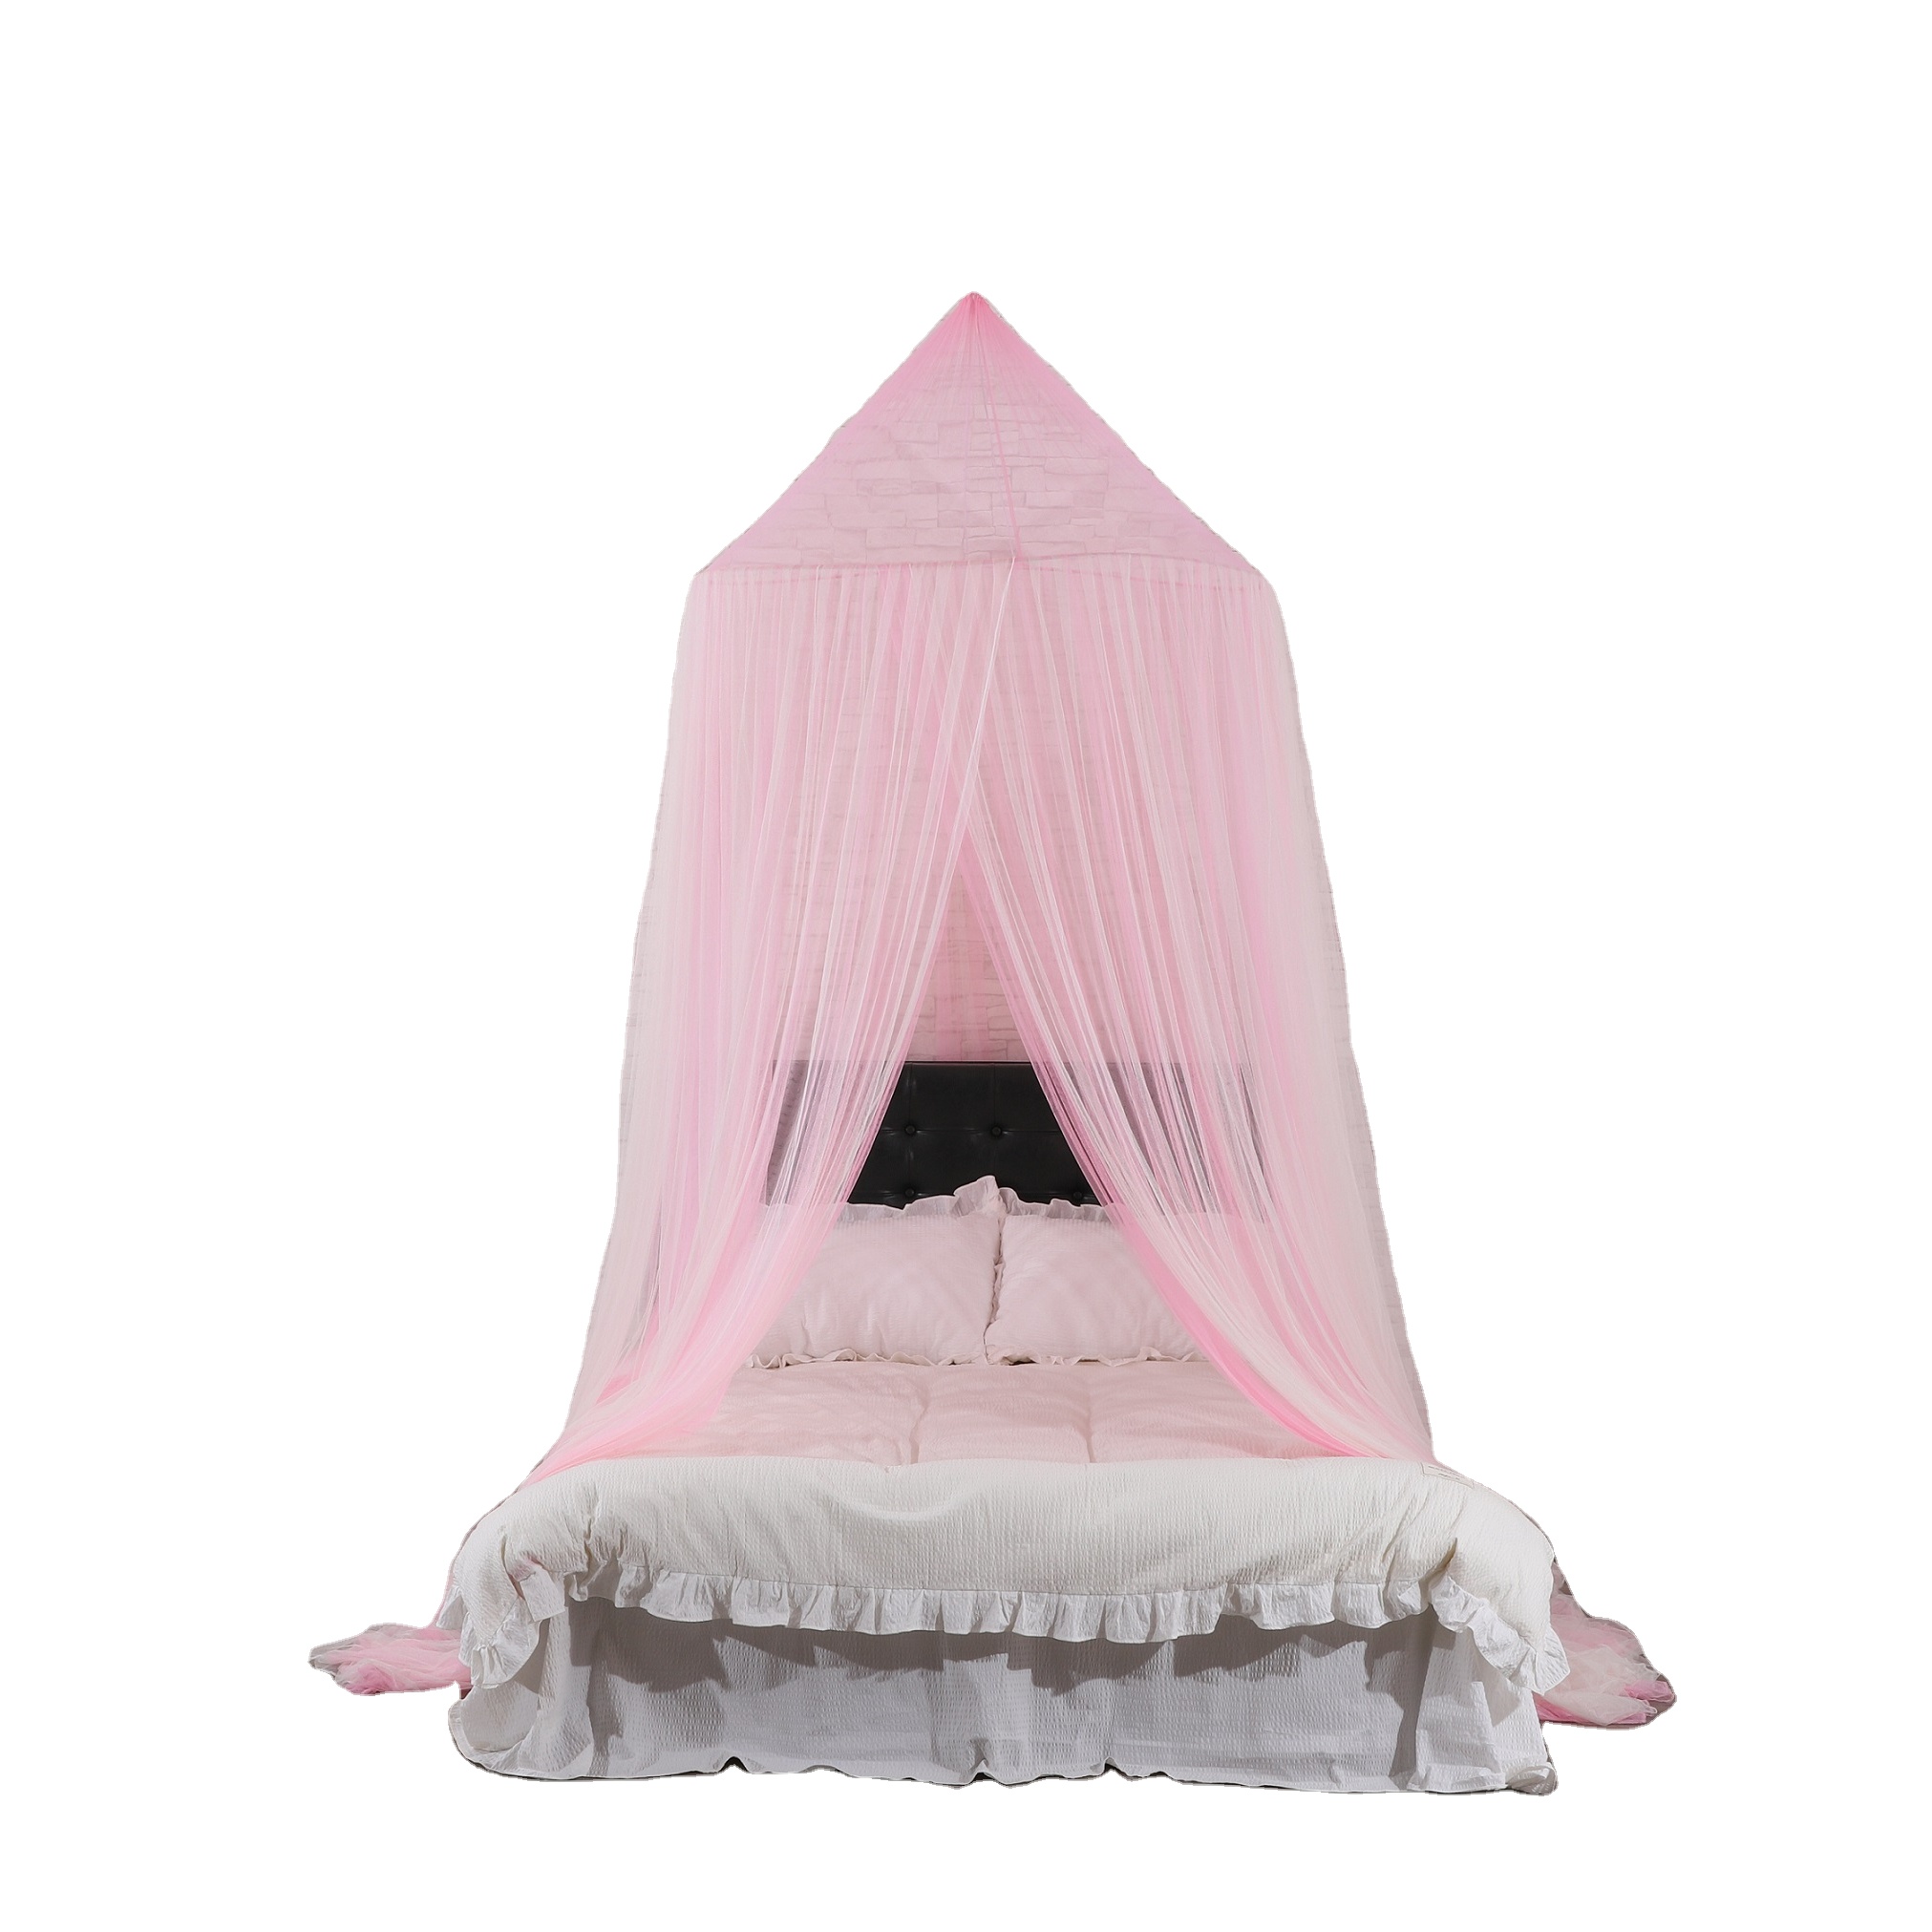 2020 New Arrival Design Prinzessin Dreamy Bed Canopy Hanging Double Mesh Moskitonetz